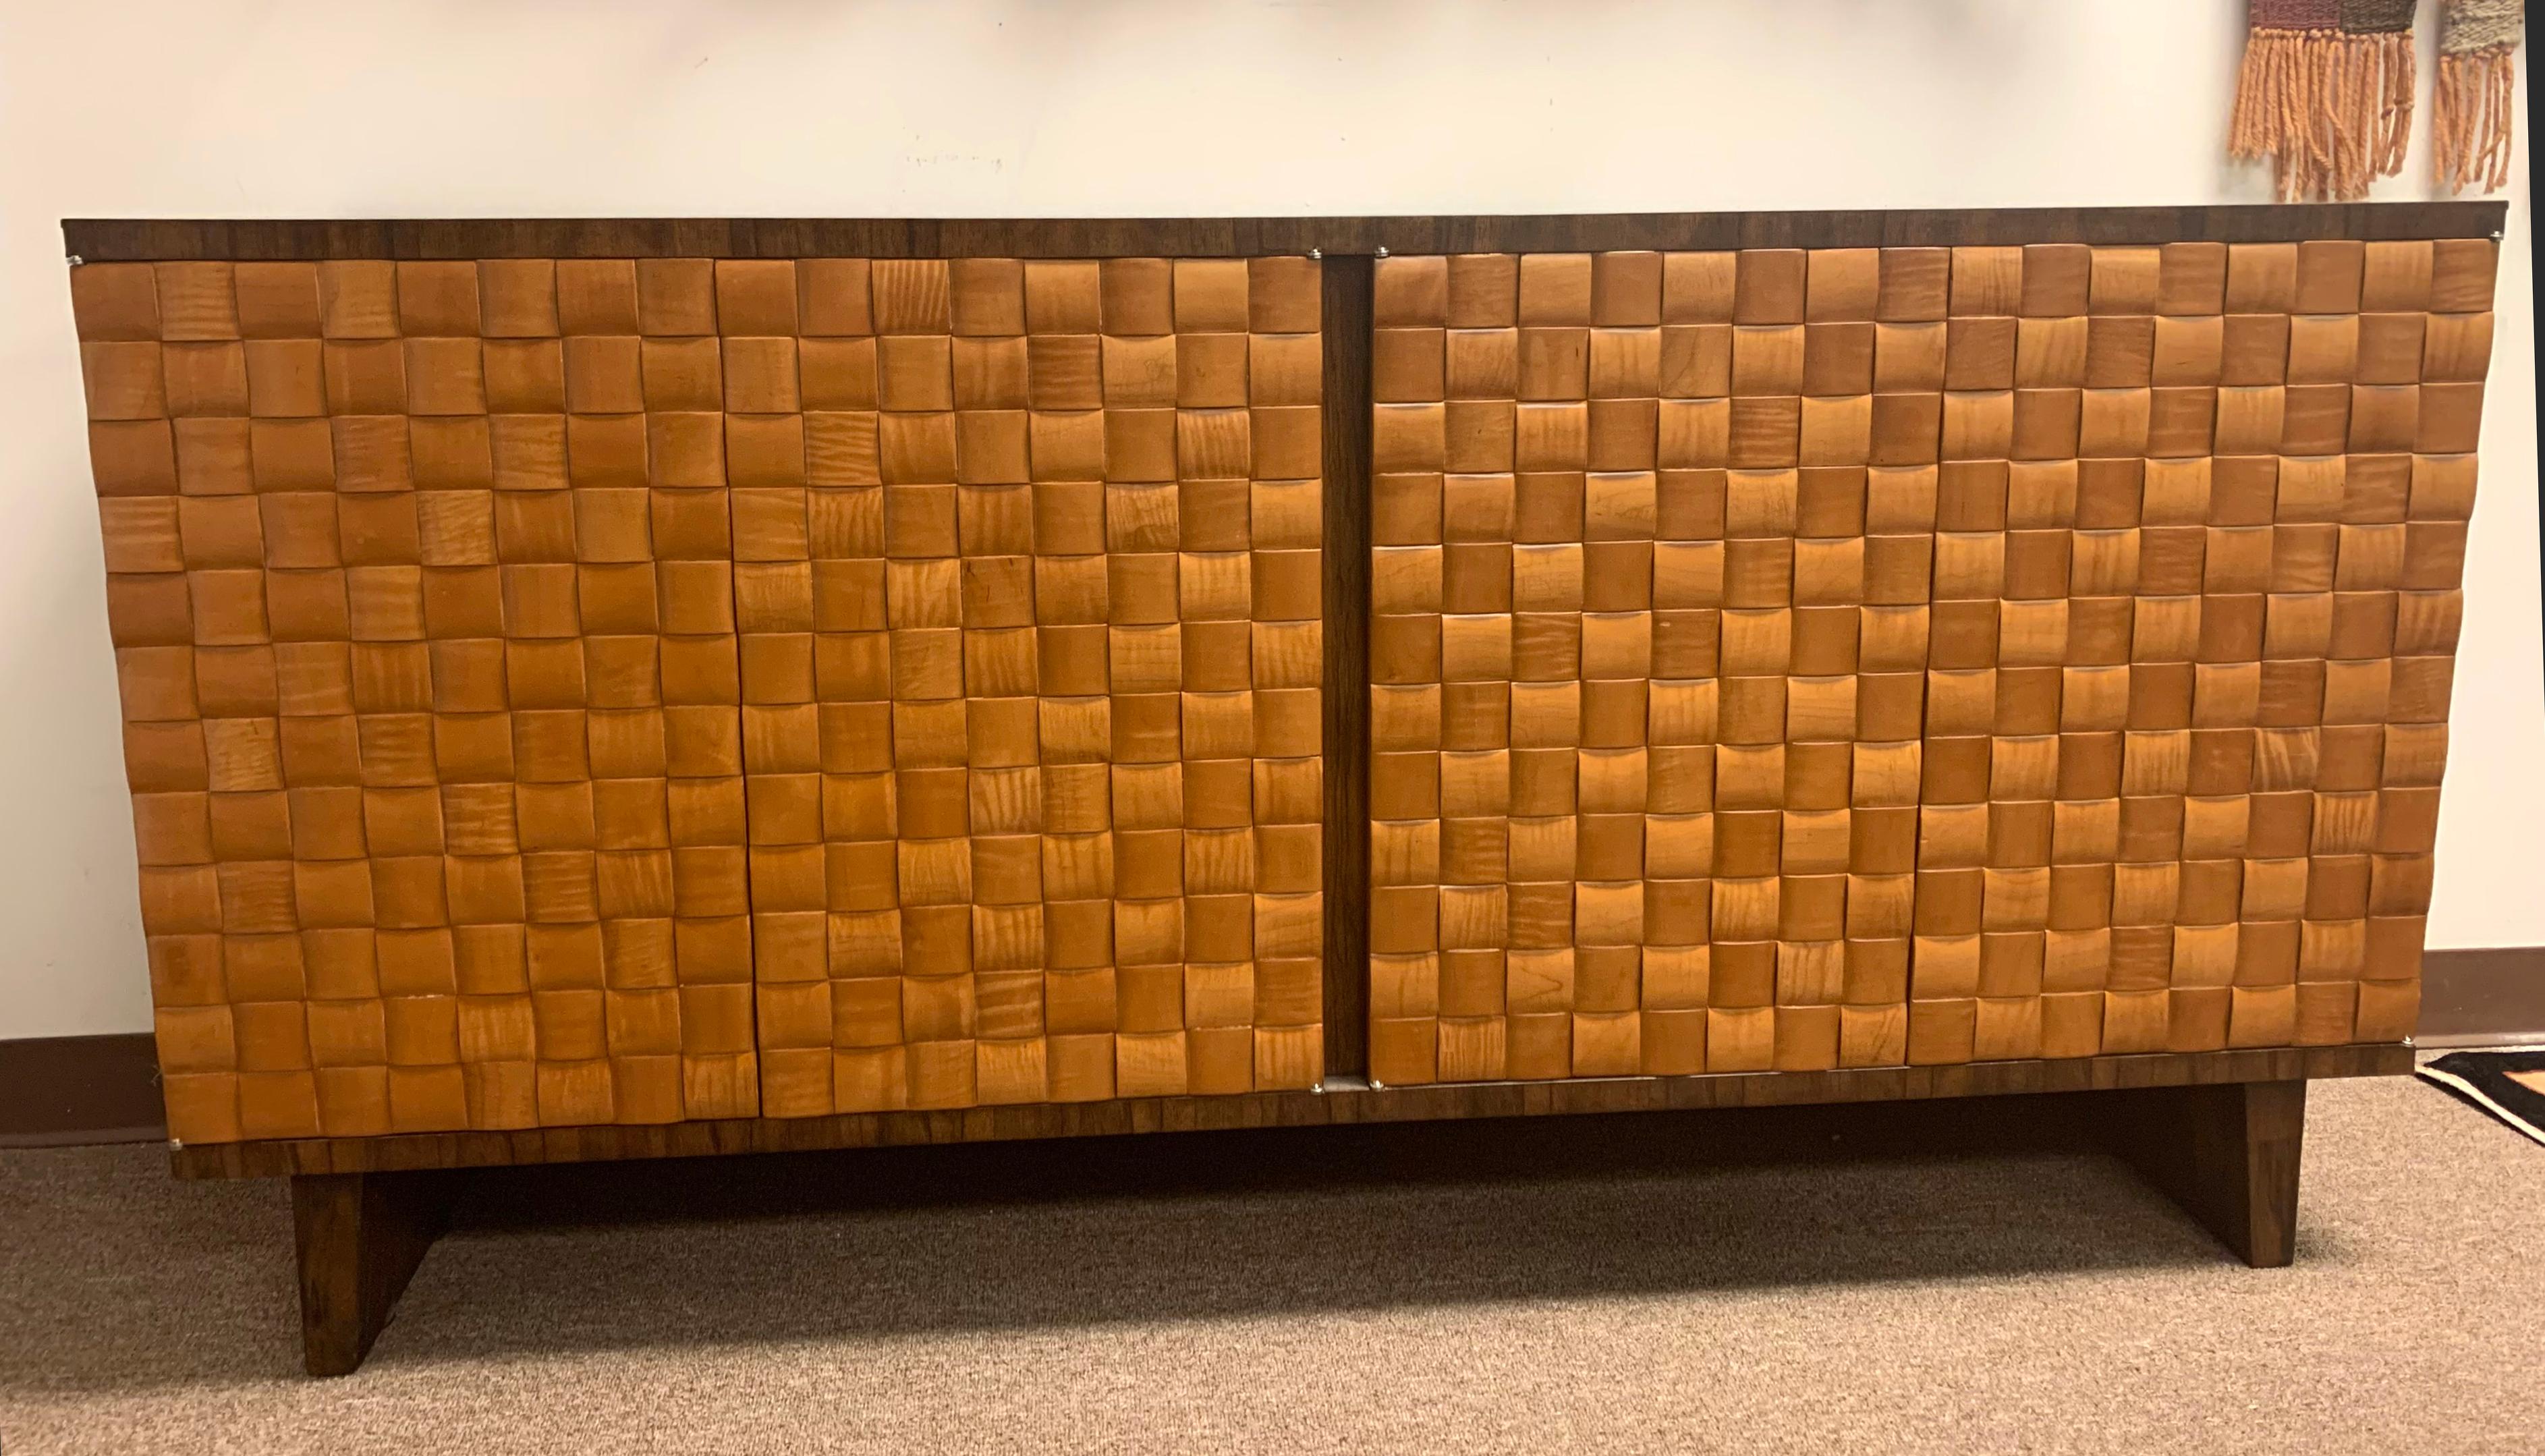 For your consideration is a wonderful, weave front and wood credenza, by Theodore Alexander for Keno Brothers, circa the 2000s. In excellent vintage condition. The dimensions are 66